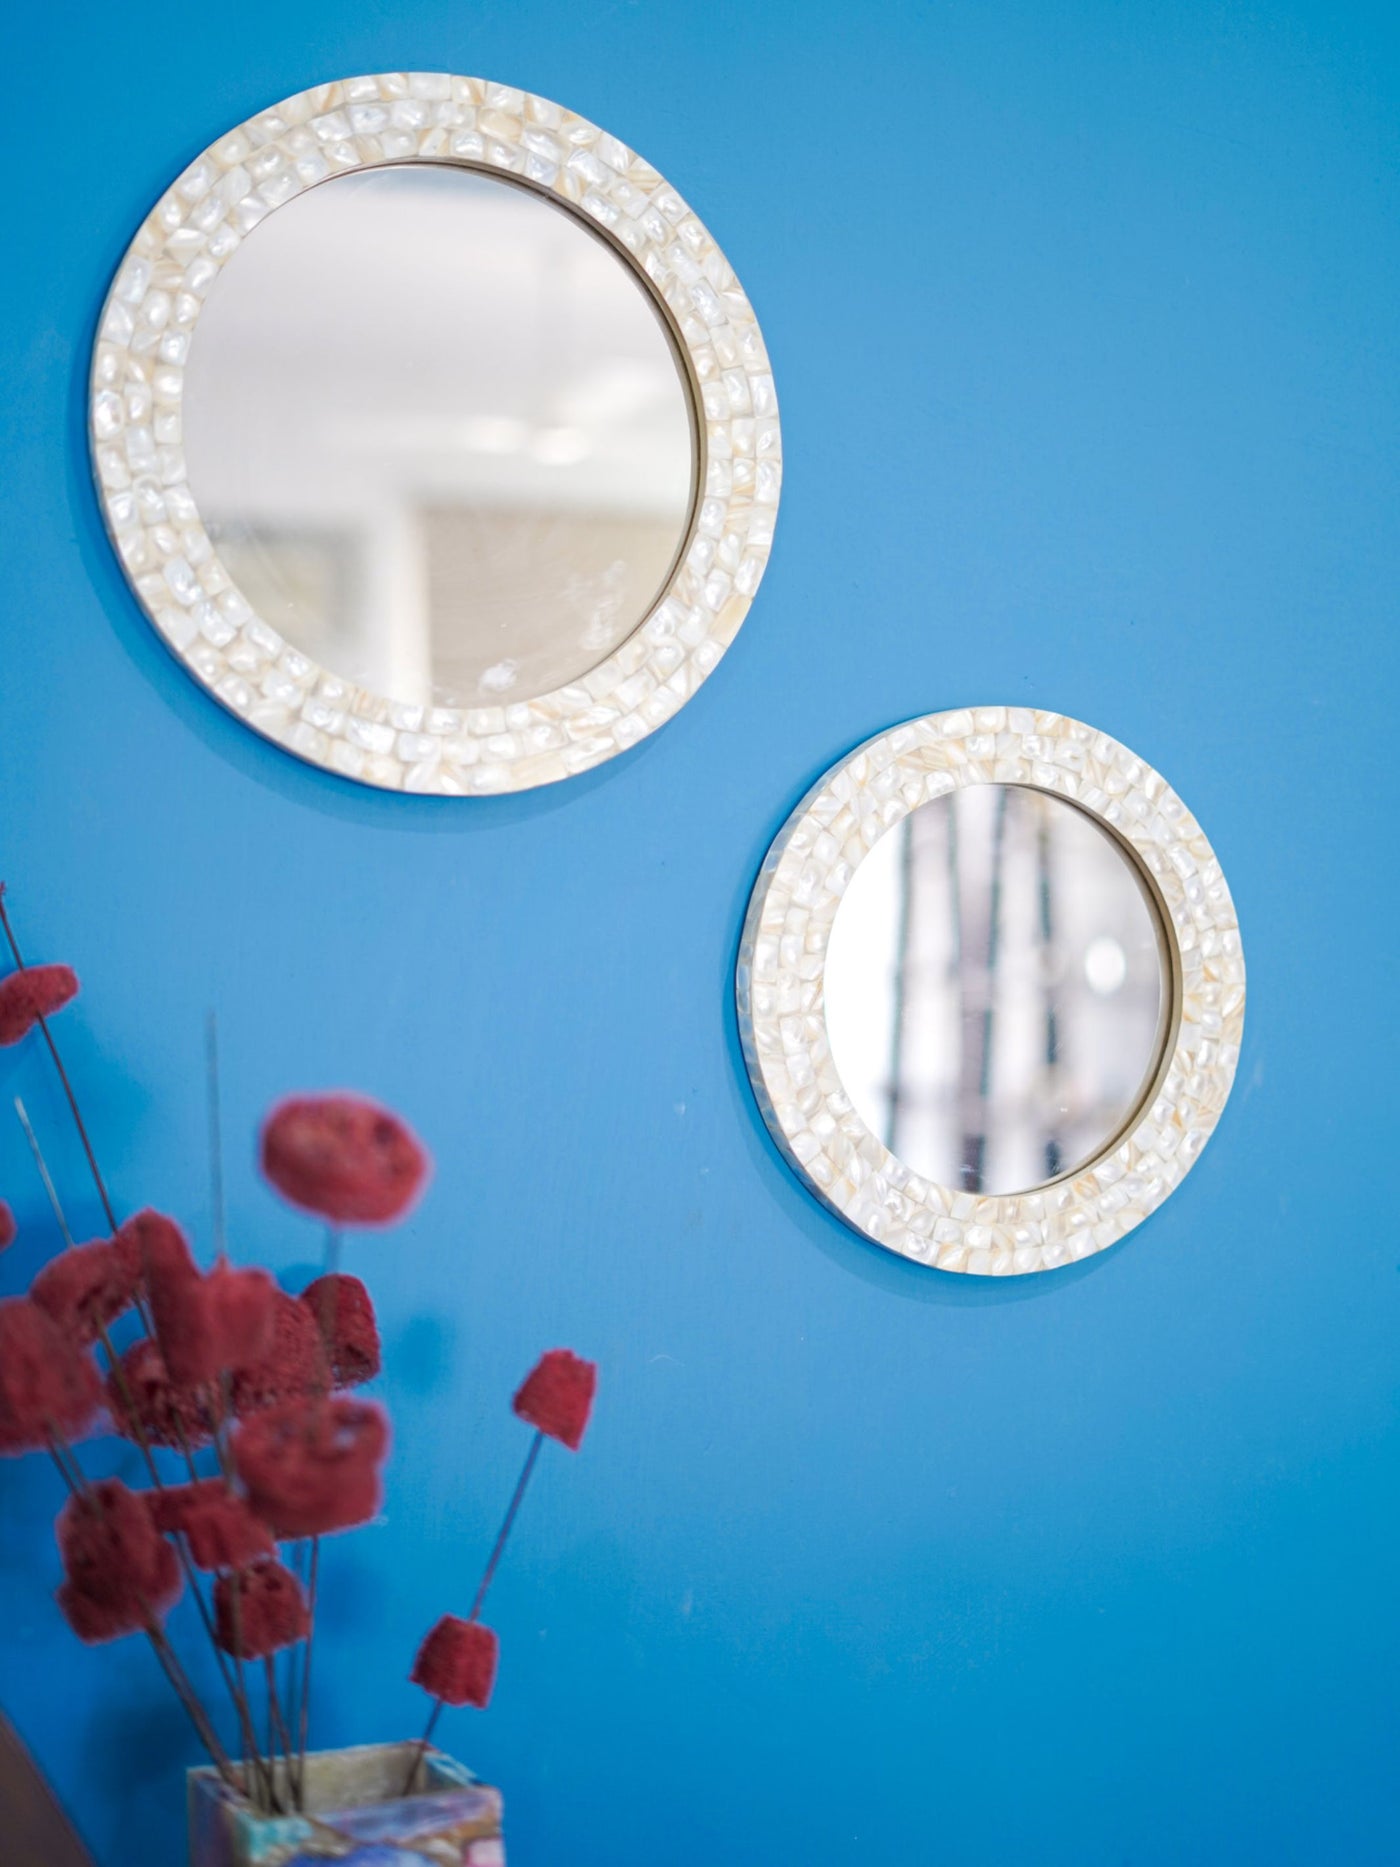 Mother of Pearl Mirrors - Set of 2